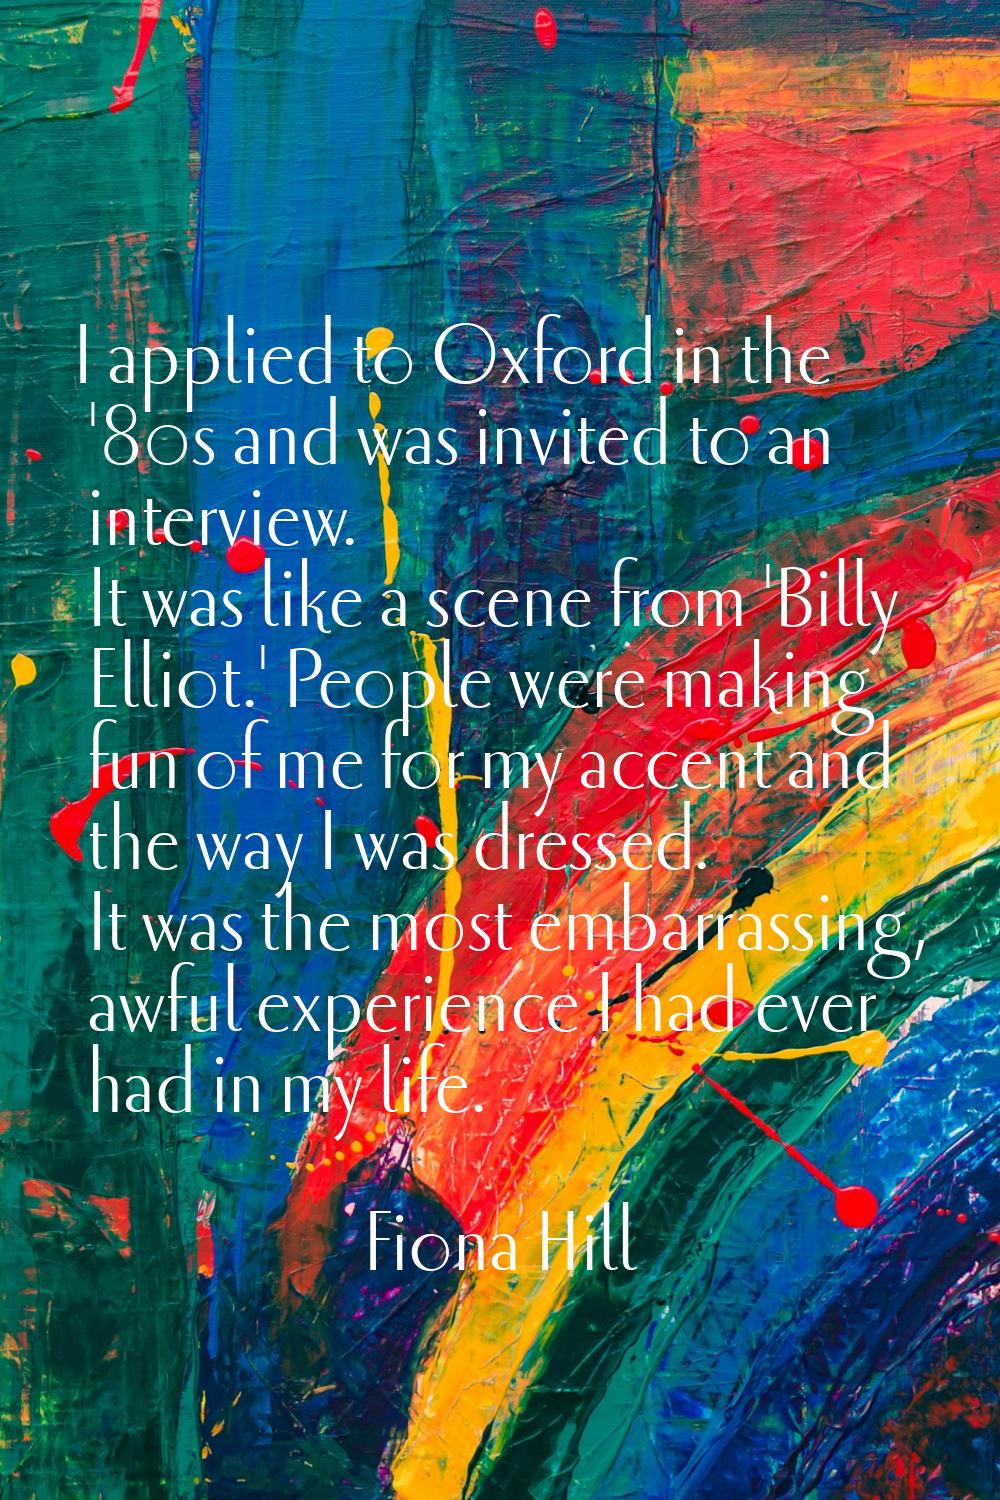 I applied to Oxford in the '80s and was invited to an interview. It was like a scene from 'Billy El